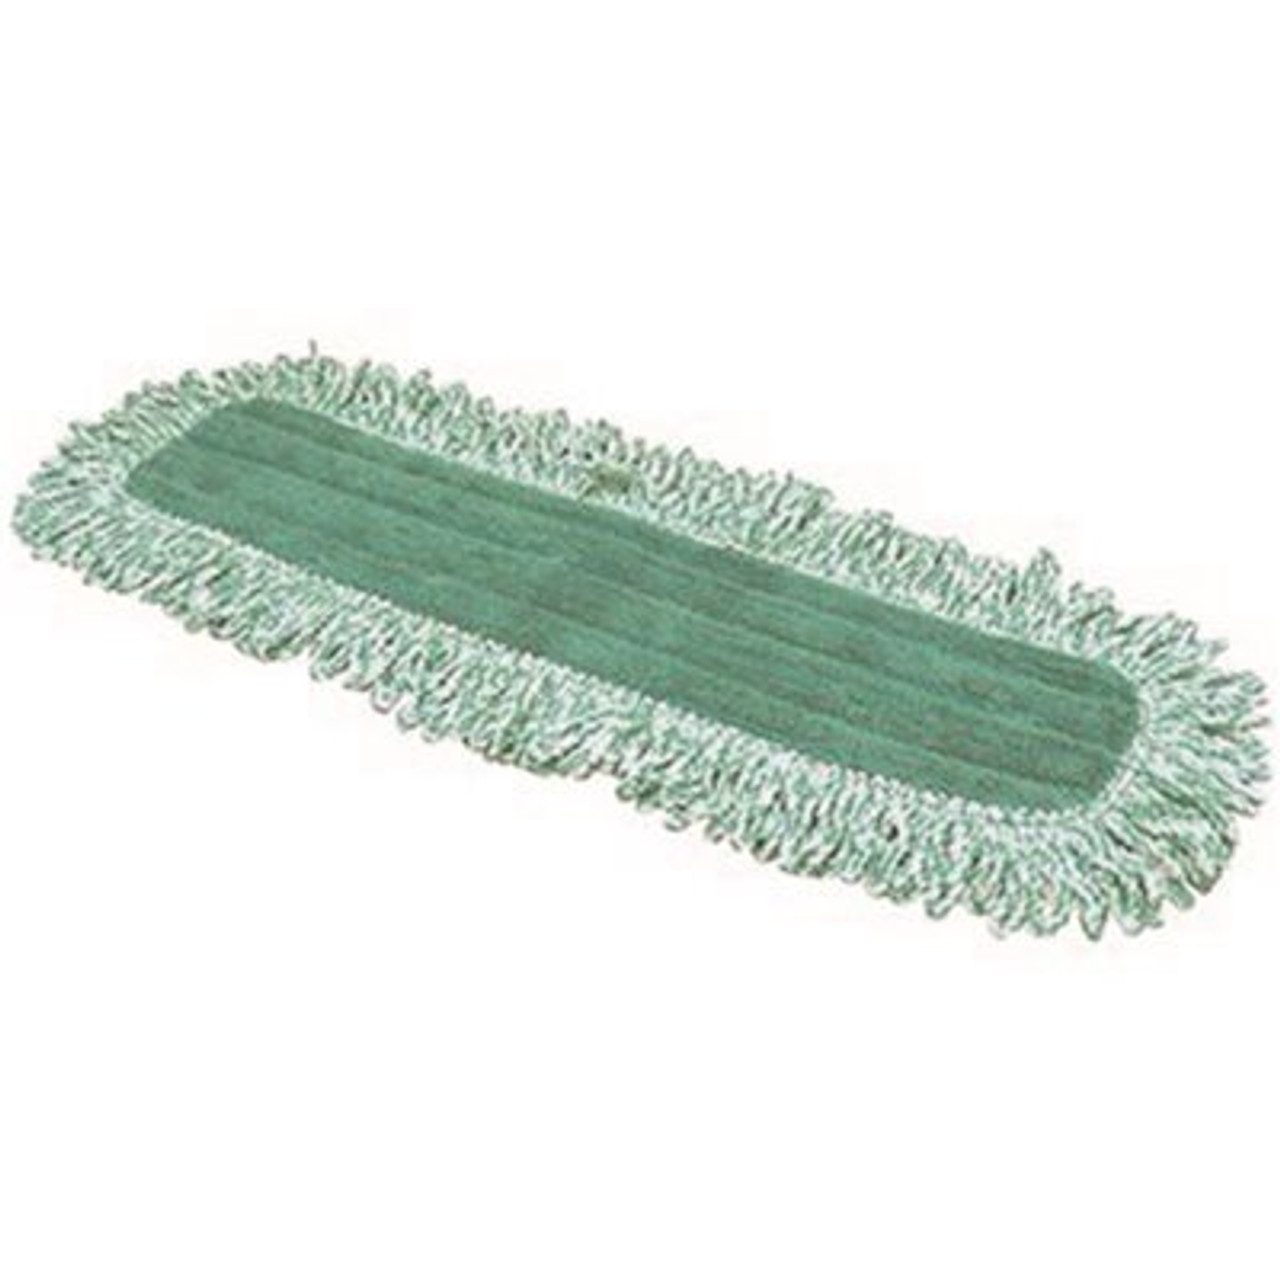 Renown 18 In. Green Microfiber Dust Mop With Fringe (3-Pack)